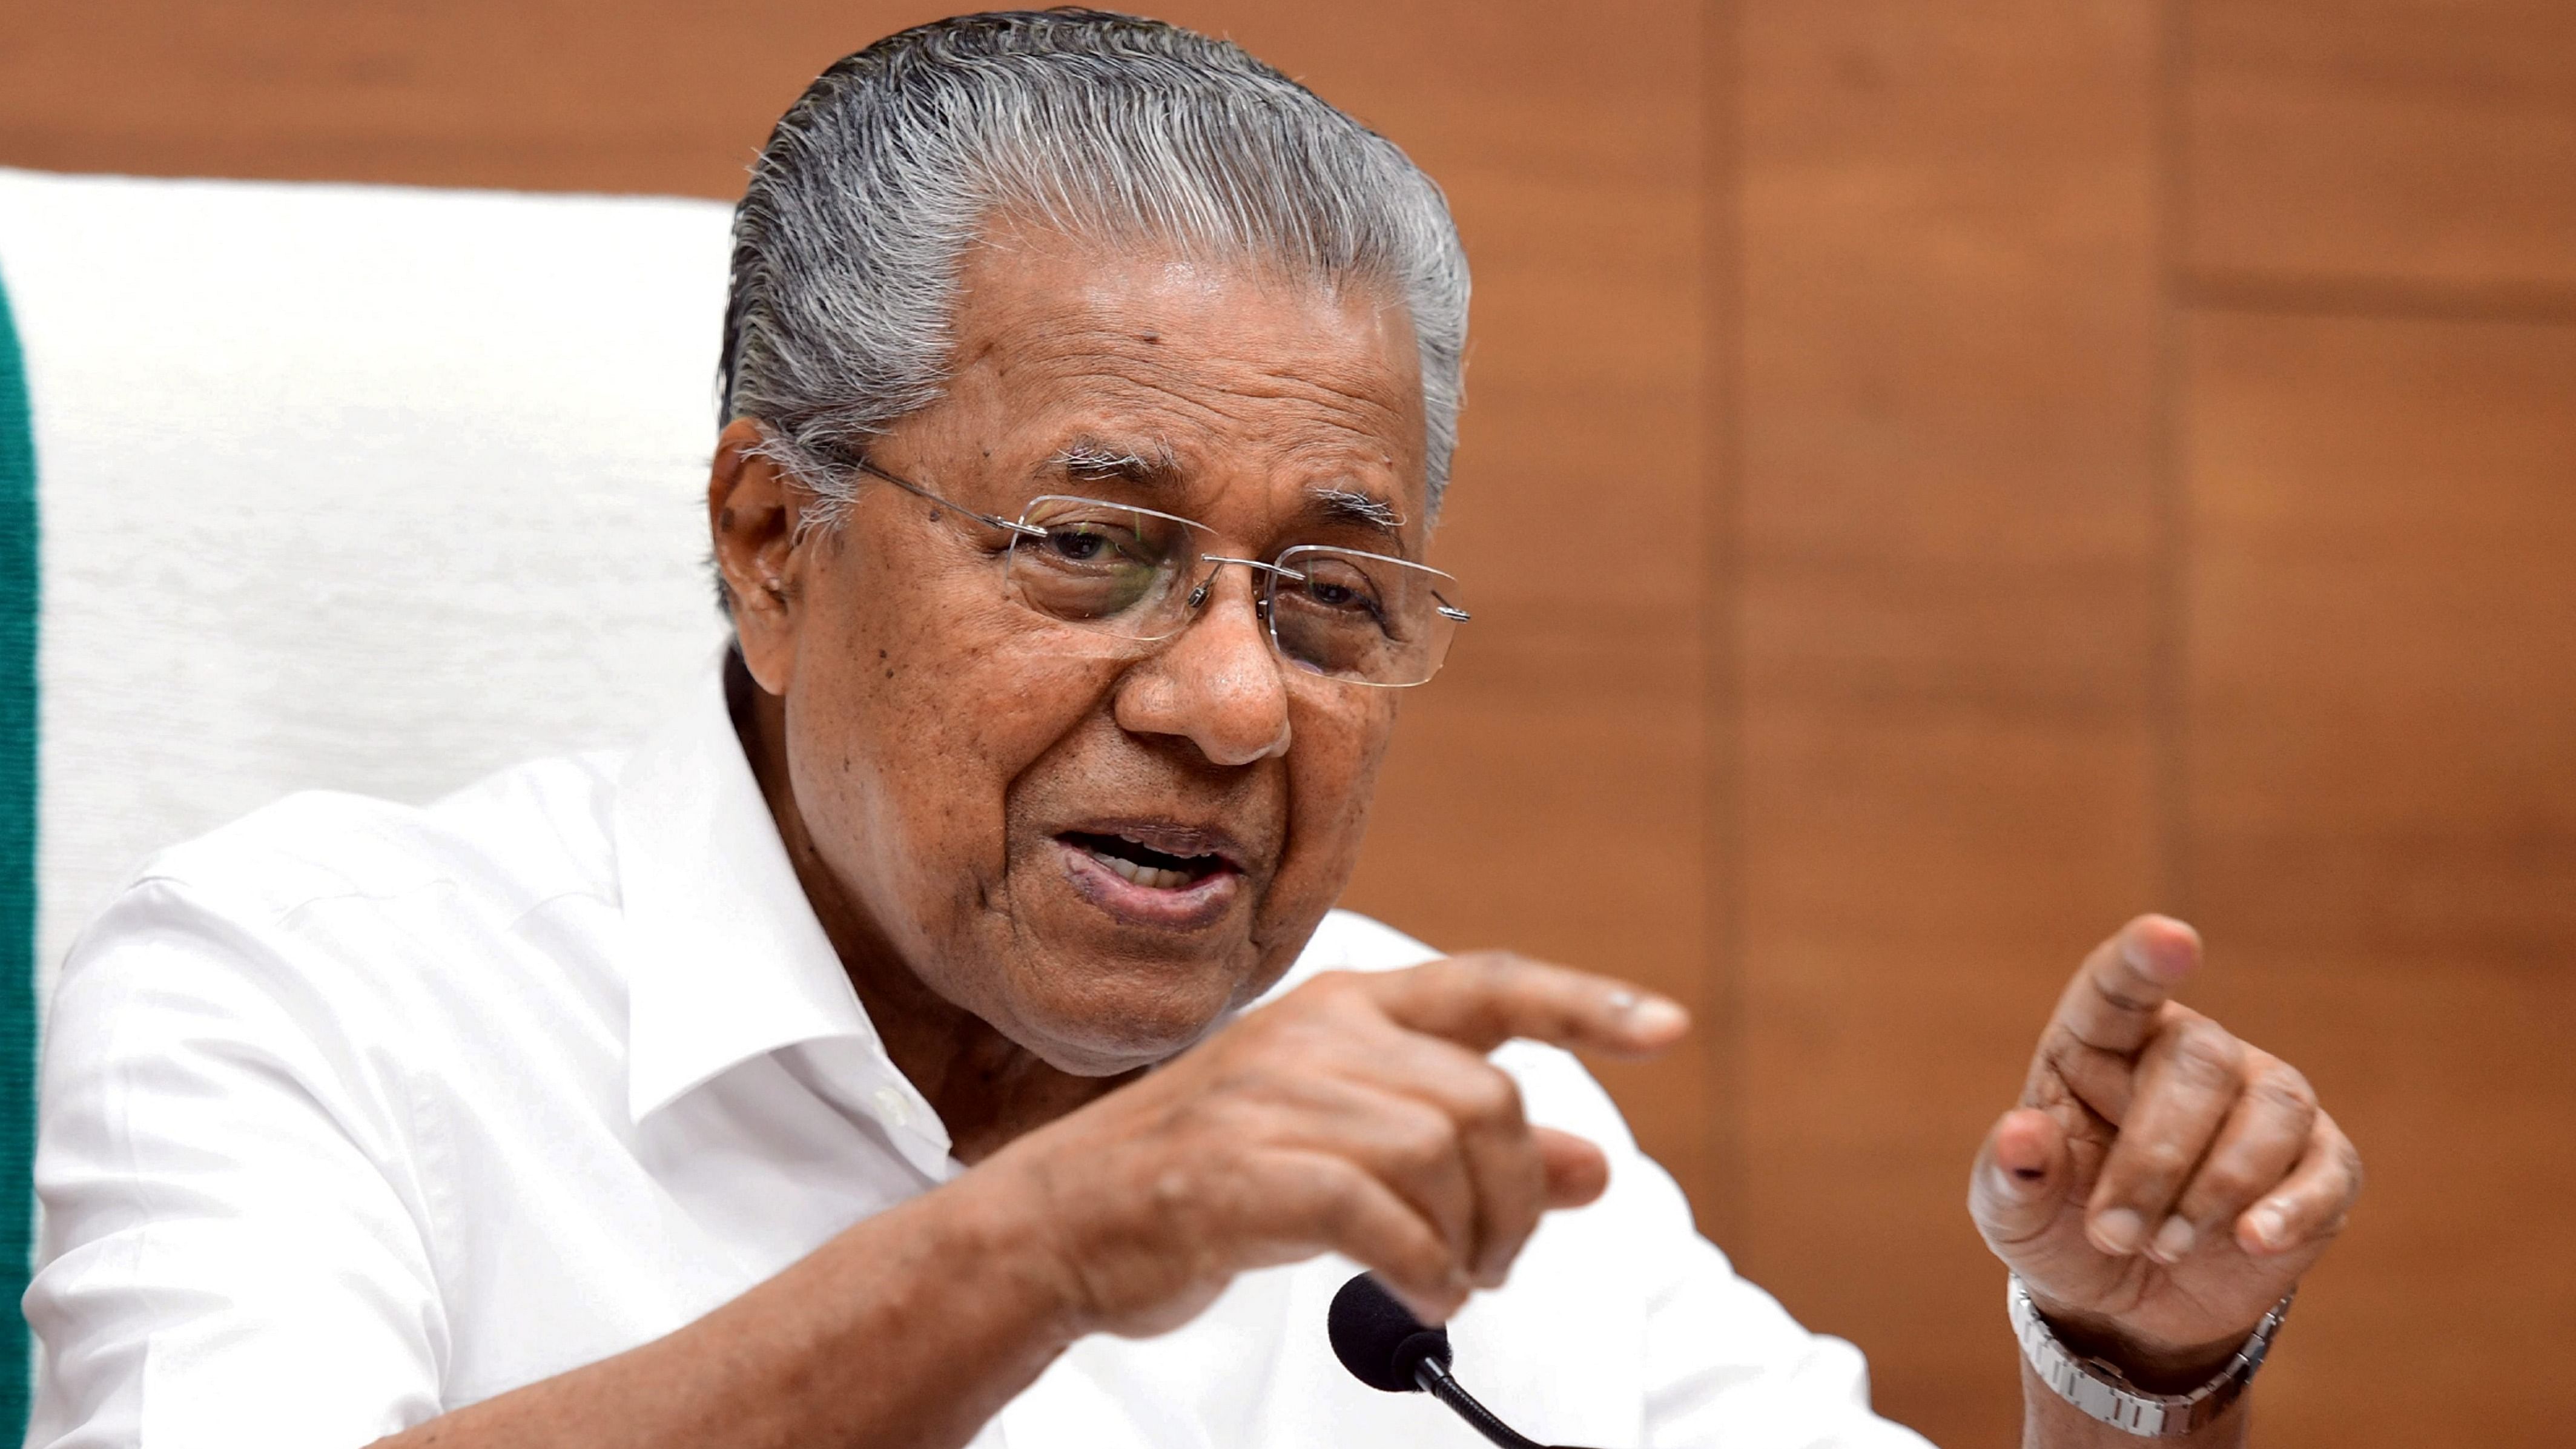 It was during a door to door visit launched by the CPI(M) in Kerala from Sunday aimed at personally clarifying people's concerns about the CPI(M) government that the CPI(M) state secretary clarified the party's approach. Credit: PTI File Photo